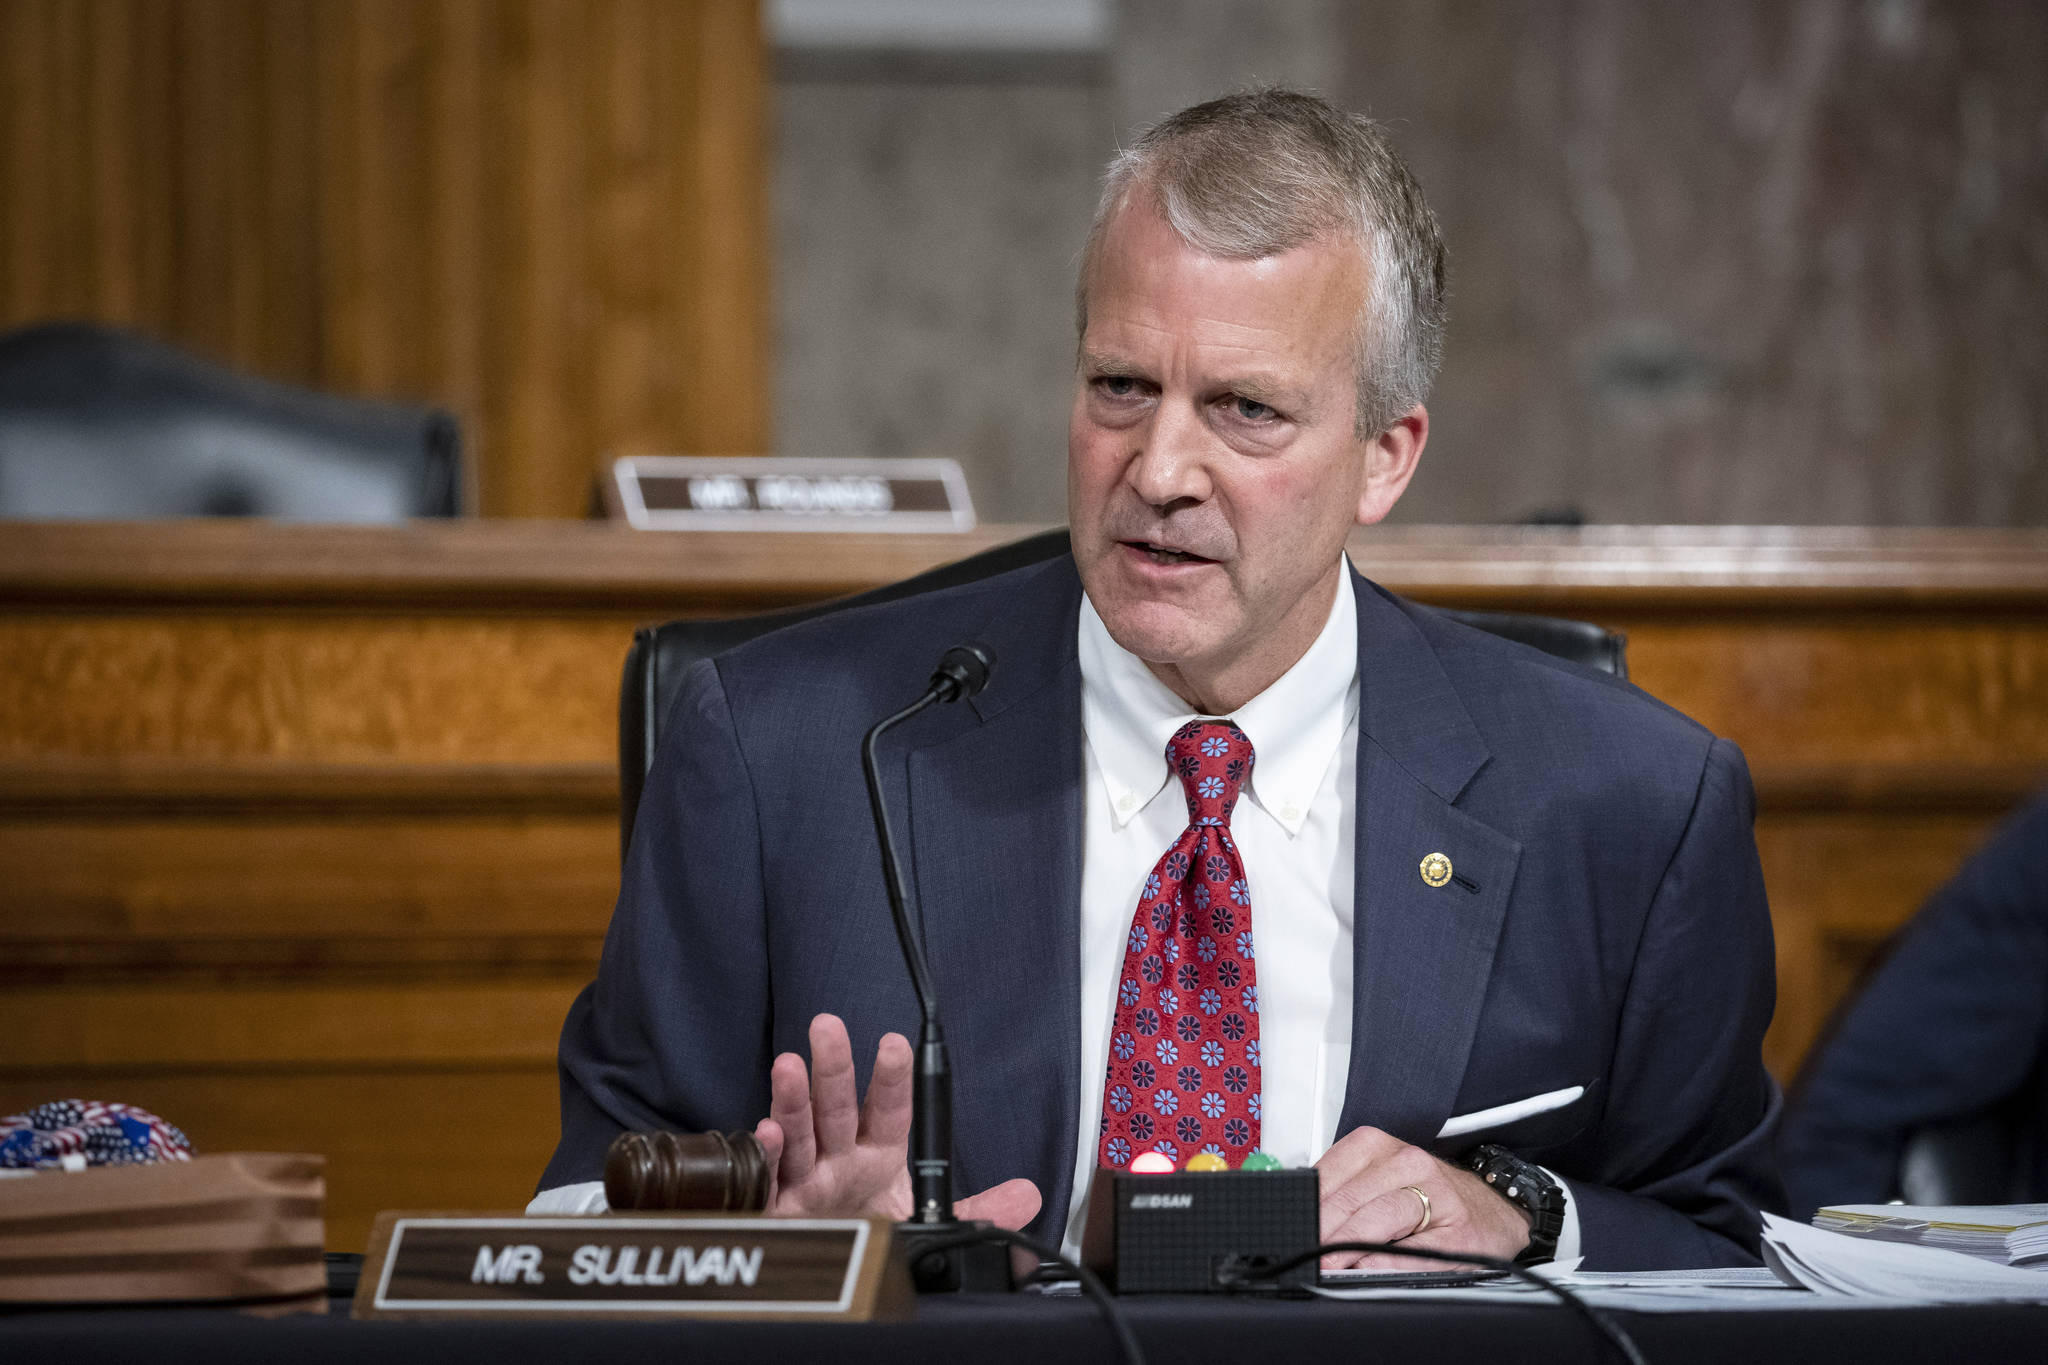 Sen. Dan Sullivan, R-Alaska, testifies during a hearing on Capitol Hill in Washington. Sen. Al Gross, an independent running with Democratic support, is challenging Sullivan in Alaska, a state that has long been a GOP stronghold. Across the country, Republicans are nervous about Senate seats like Sullivan’s they once thought safe as Democrats hope to capitalize on President Donald Trump’s unpopularity to retake the chamber. (Al Drago / Pool)